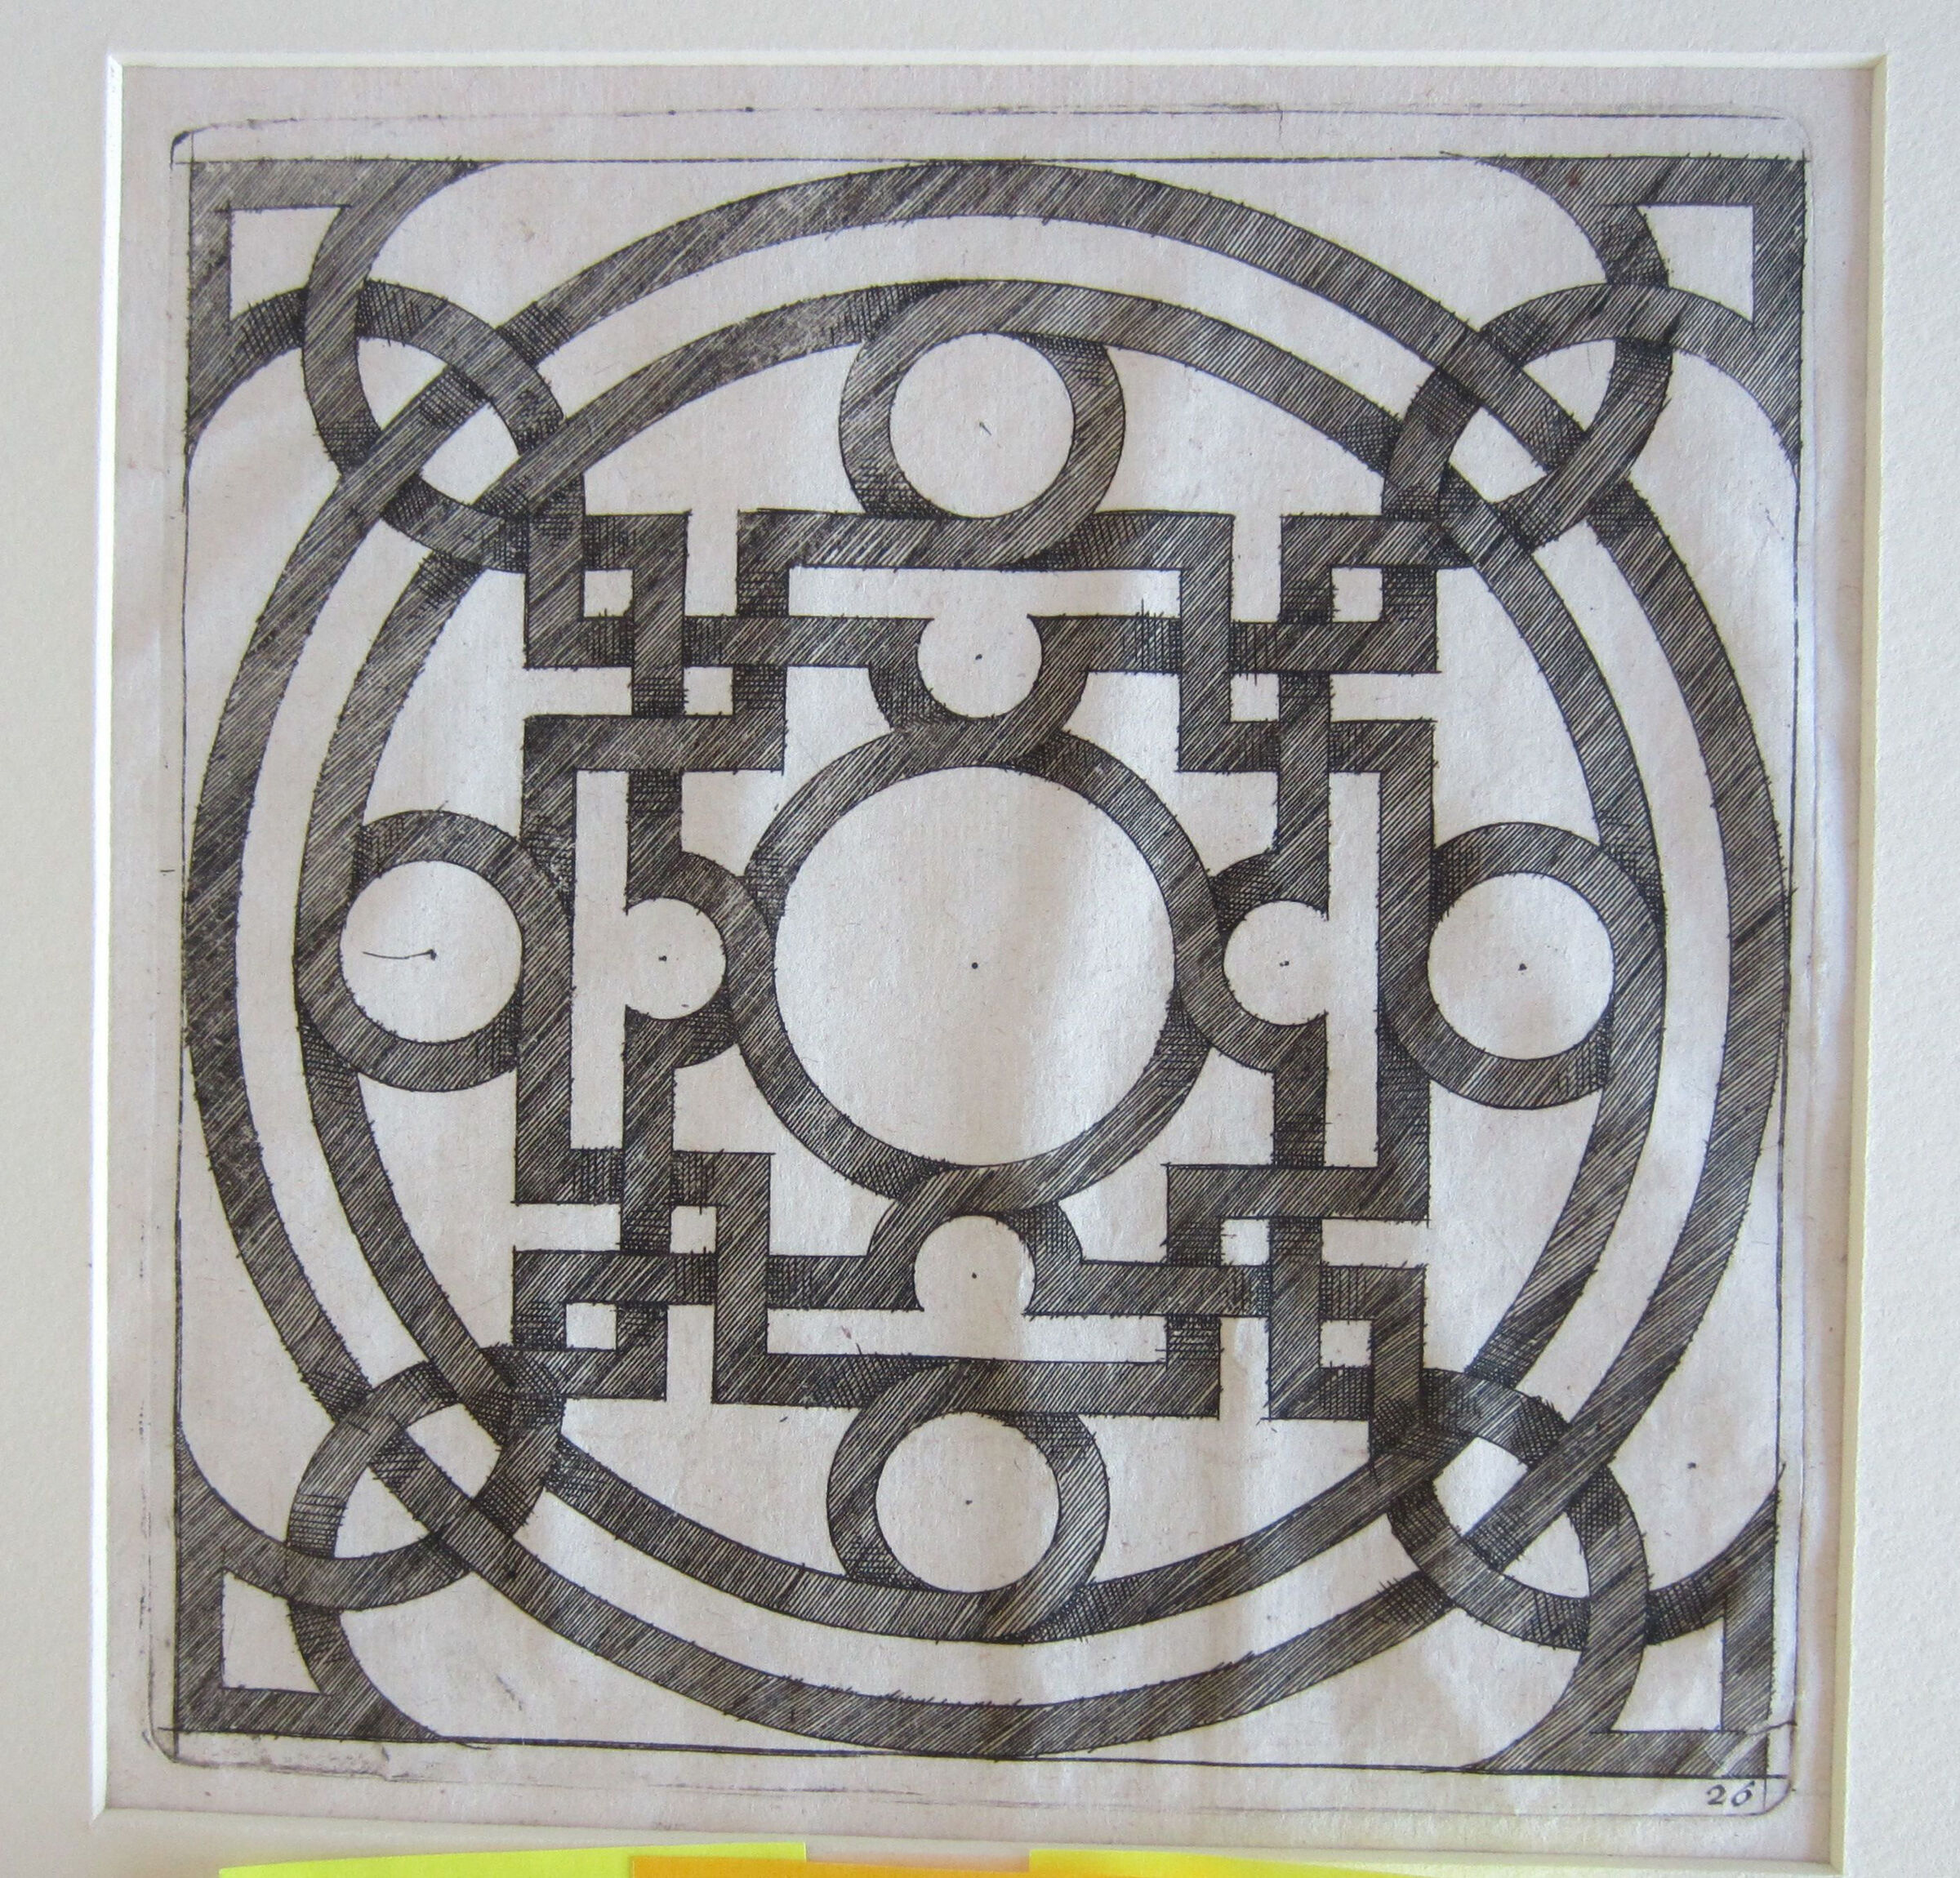 Interlace Centered By A Circle Linked To A Cross-Shaped Motif Within Two Large Linked Circles